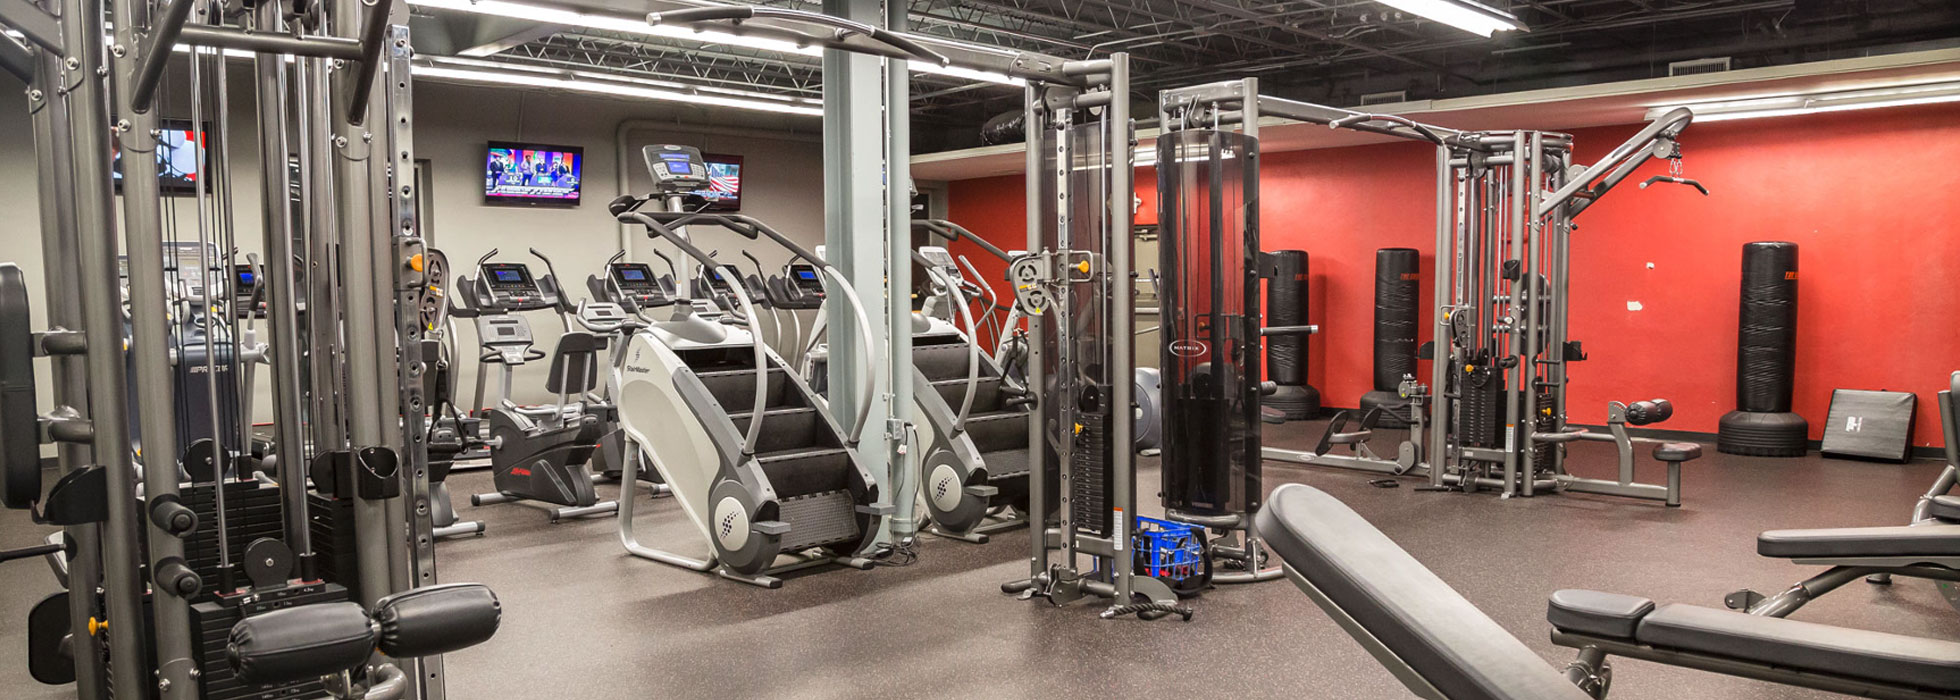 Why GTR Fit Is One of the Best Gyms Near River Oaks